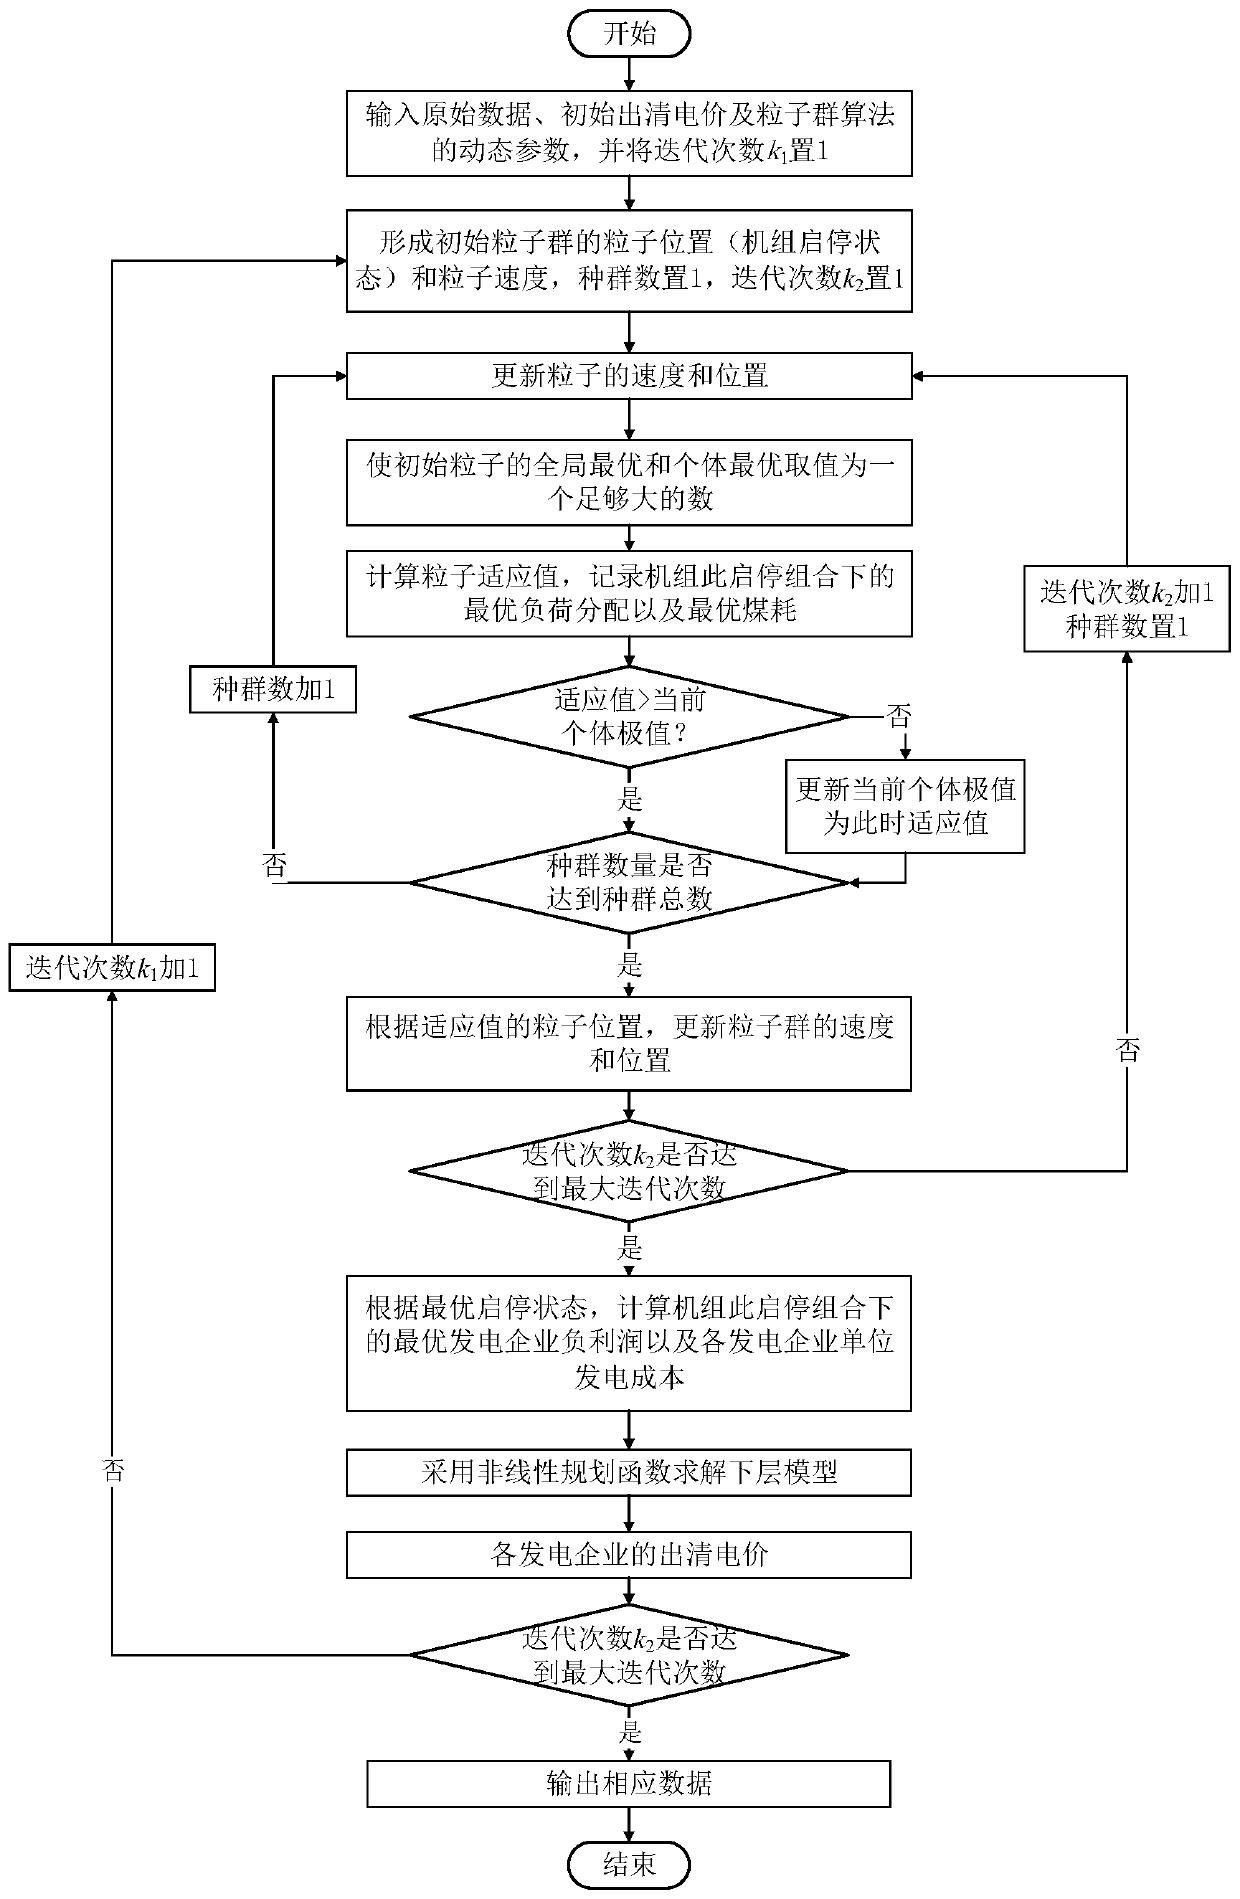 Electric quantity distribution method with renewable energy participating in medium-and-long-term electric power transaction